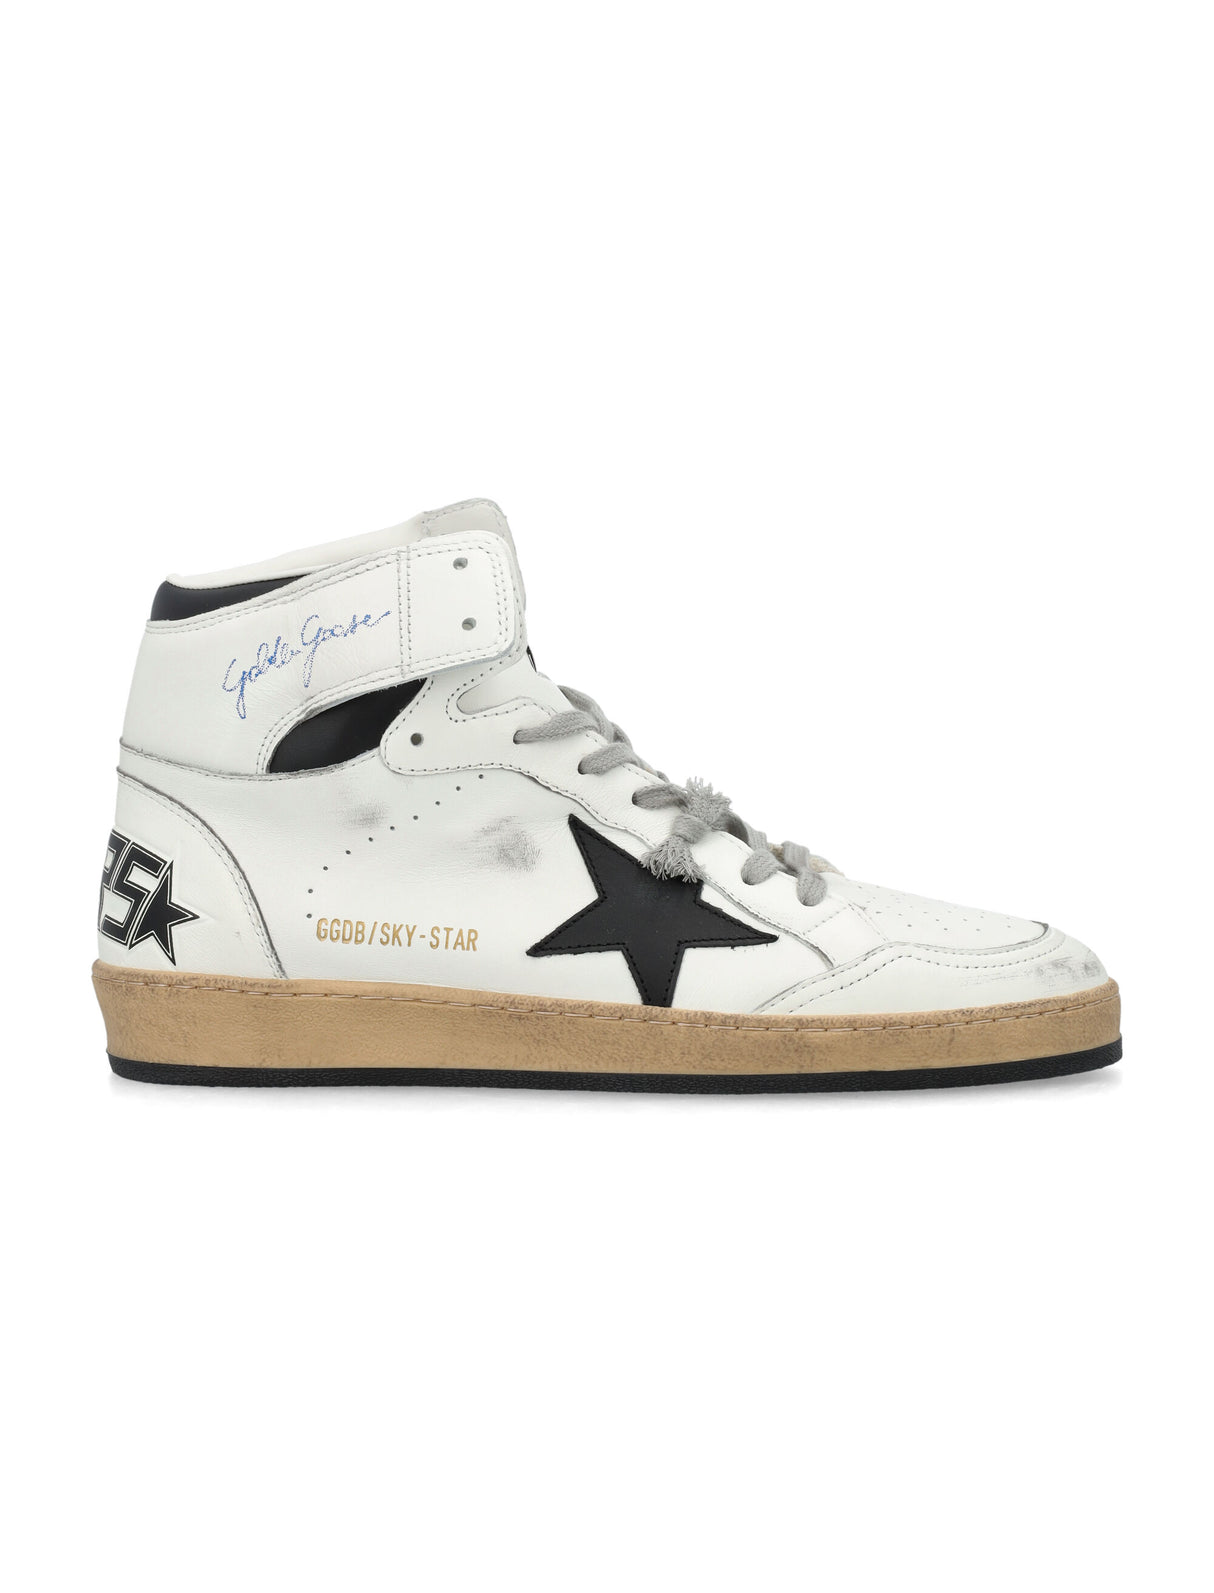 GOLDEN GOOSE MEN'S HIGH-TOP SNEAKERS WITH PERFORATED DETAILS AND VINTAGE EFFECT